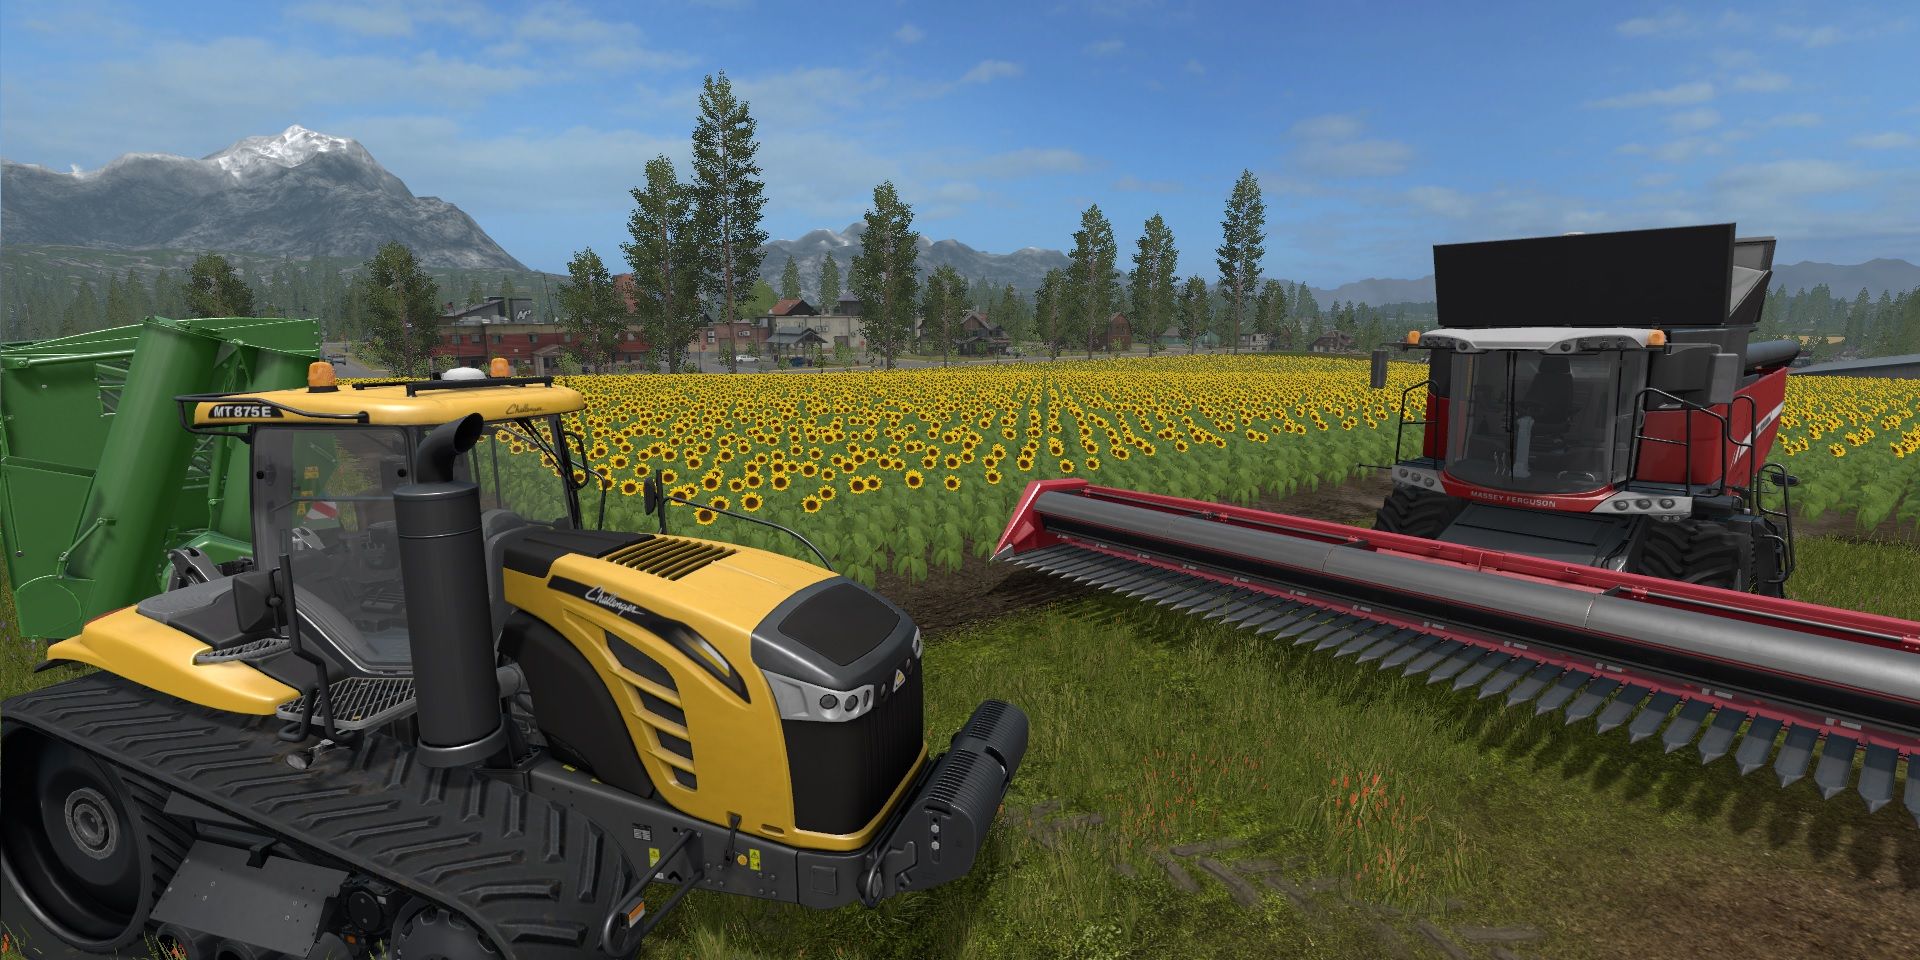 Two tractors in a field